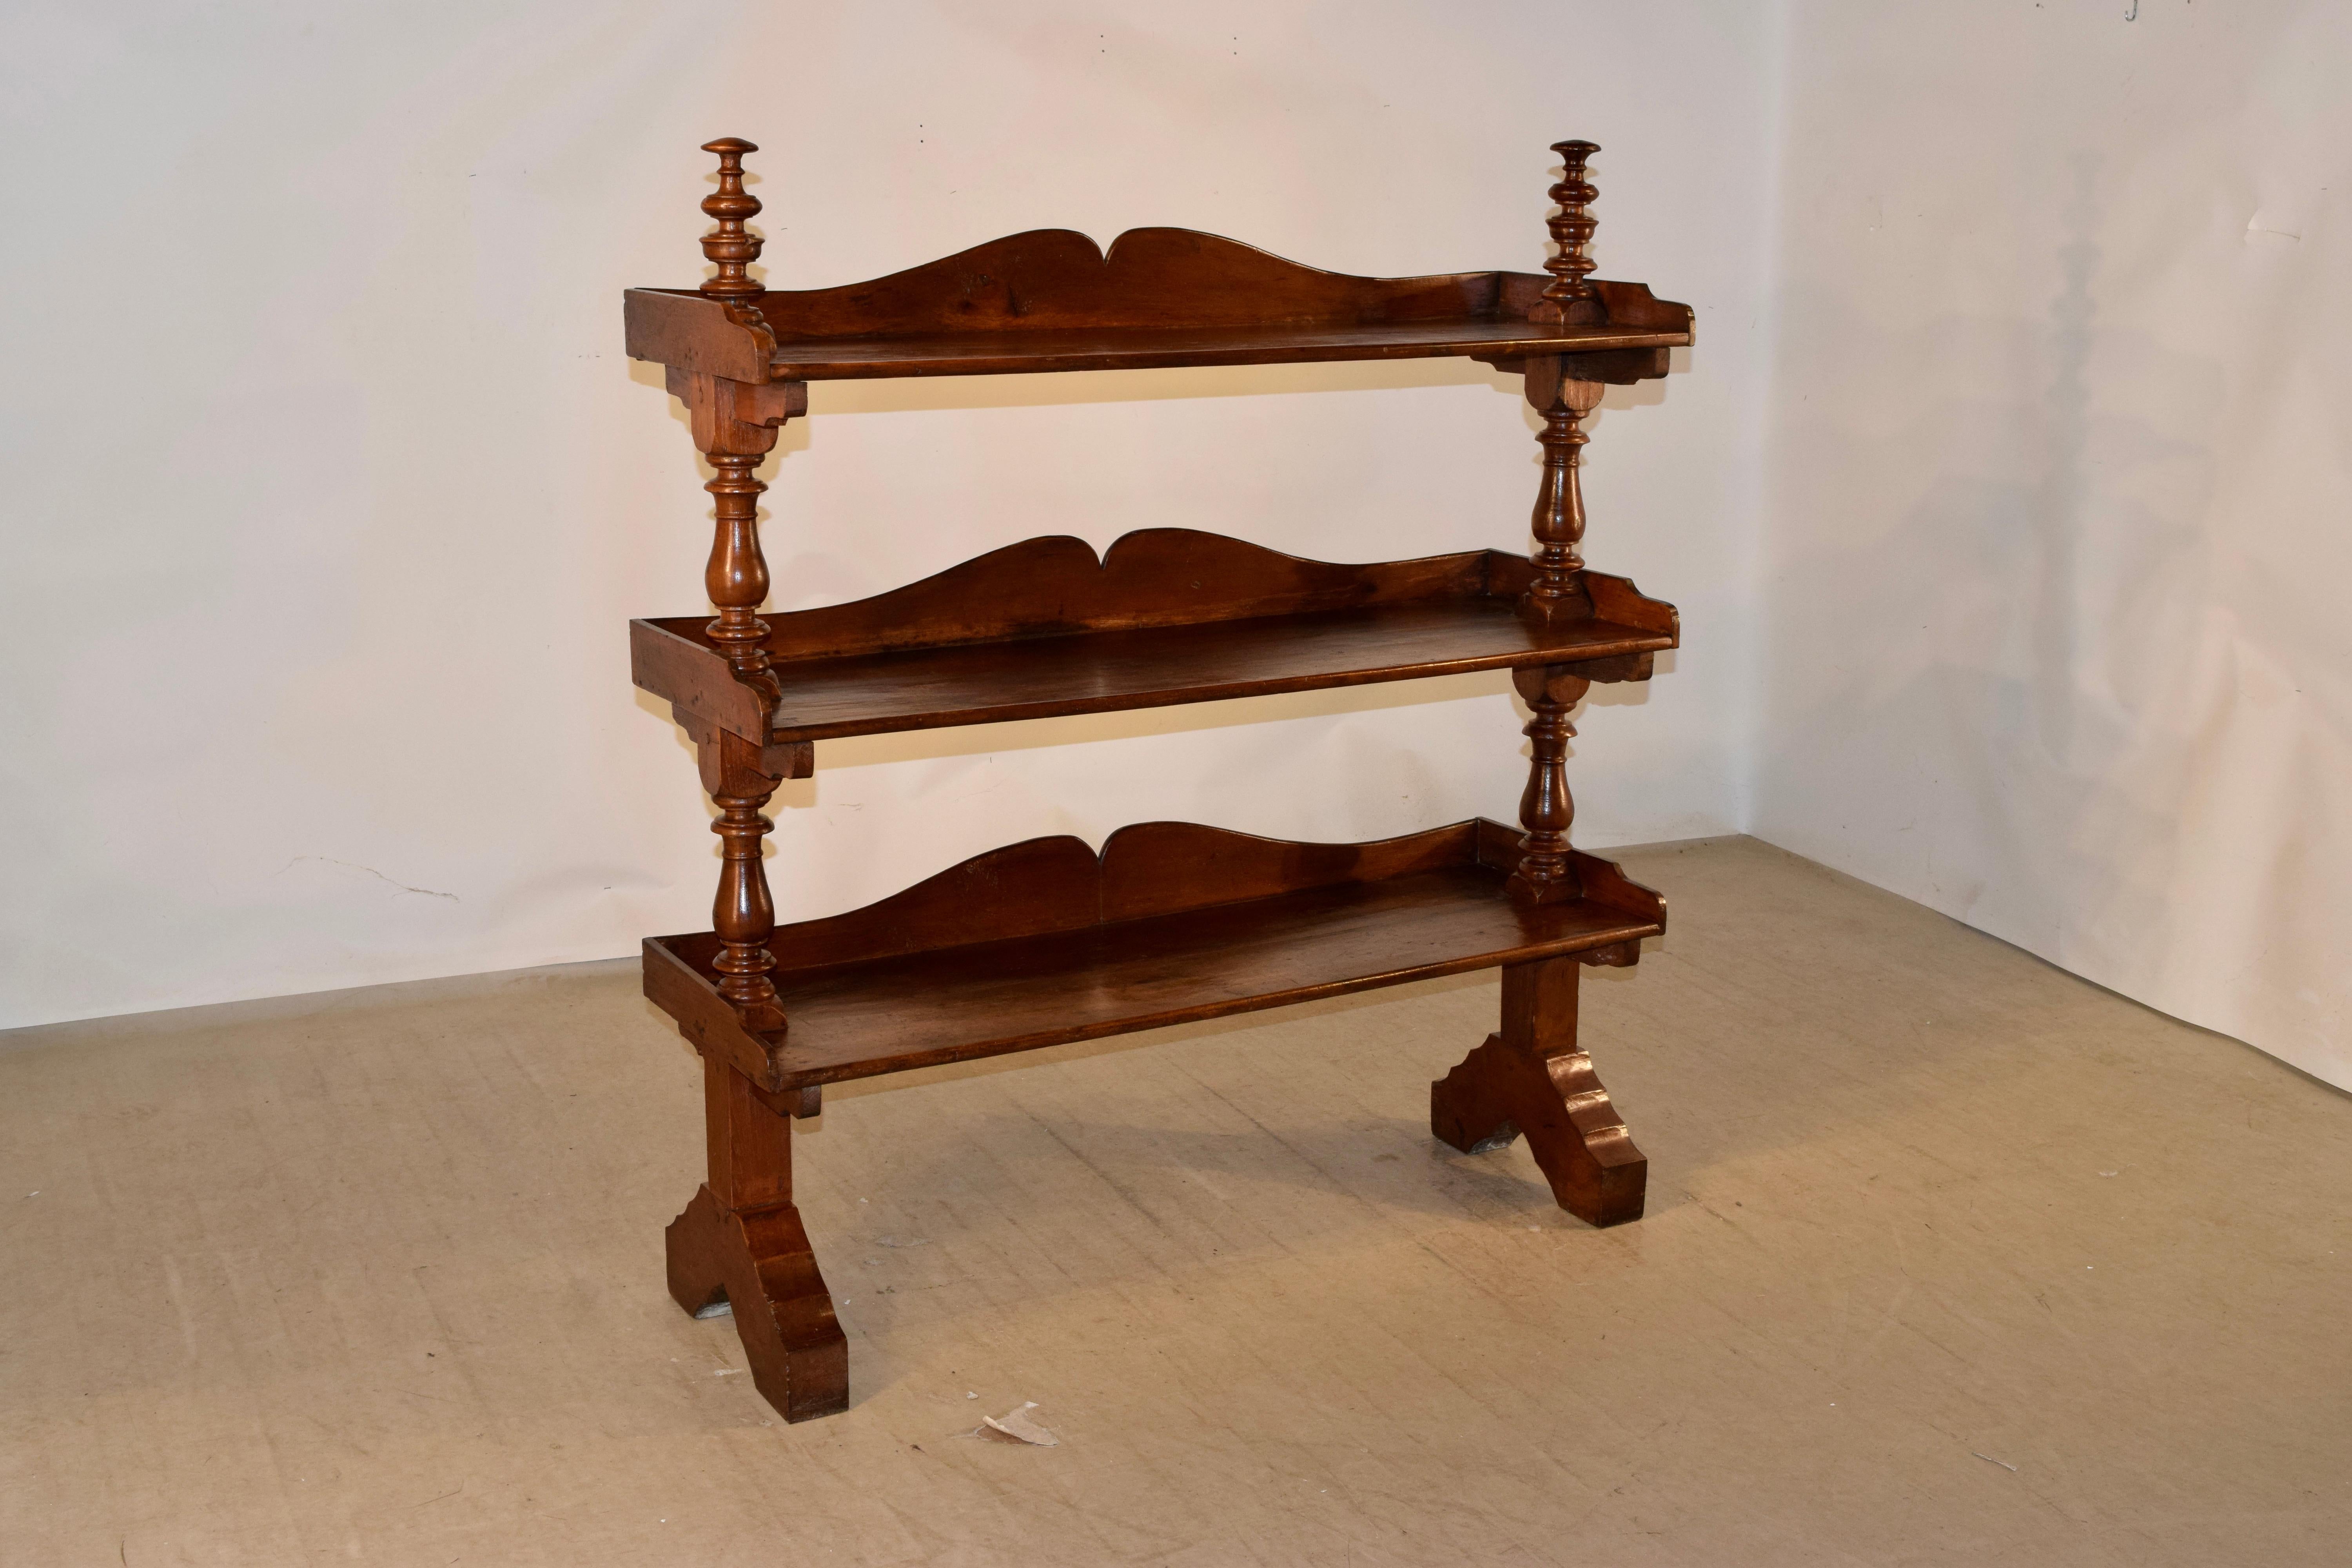 19th century British Colonial shelf made from teak. There are tall hand turned finials on the top over three shelves, all with scalloped galleries. The shelves are separated by hand turned shelf supports and the legs are shaped and splayed.